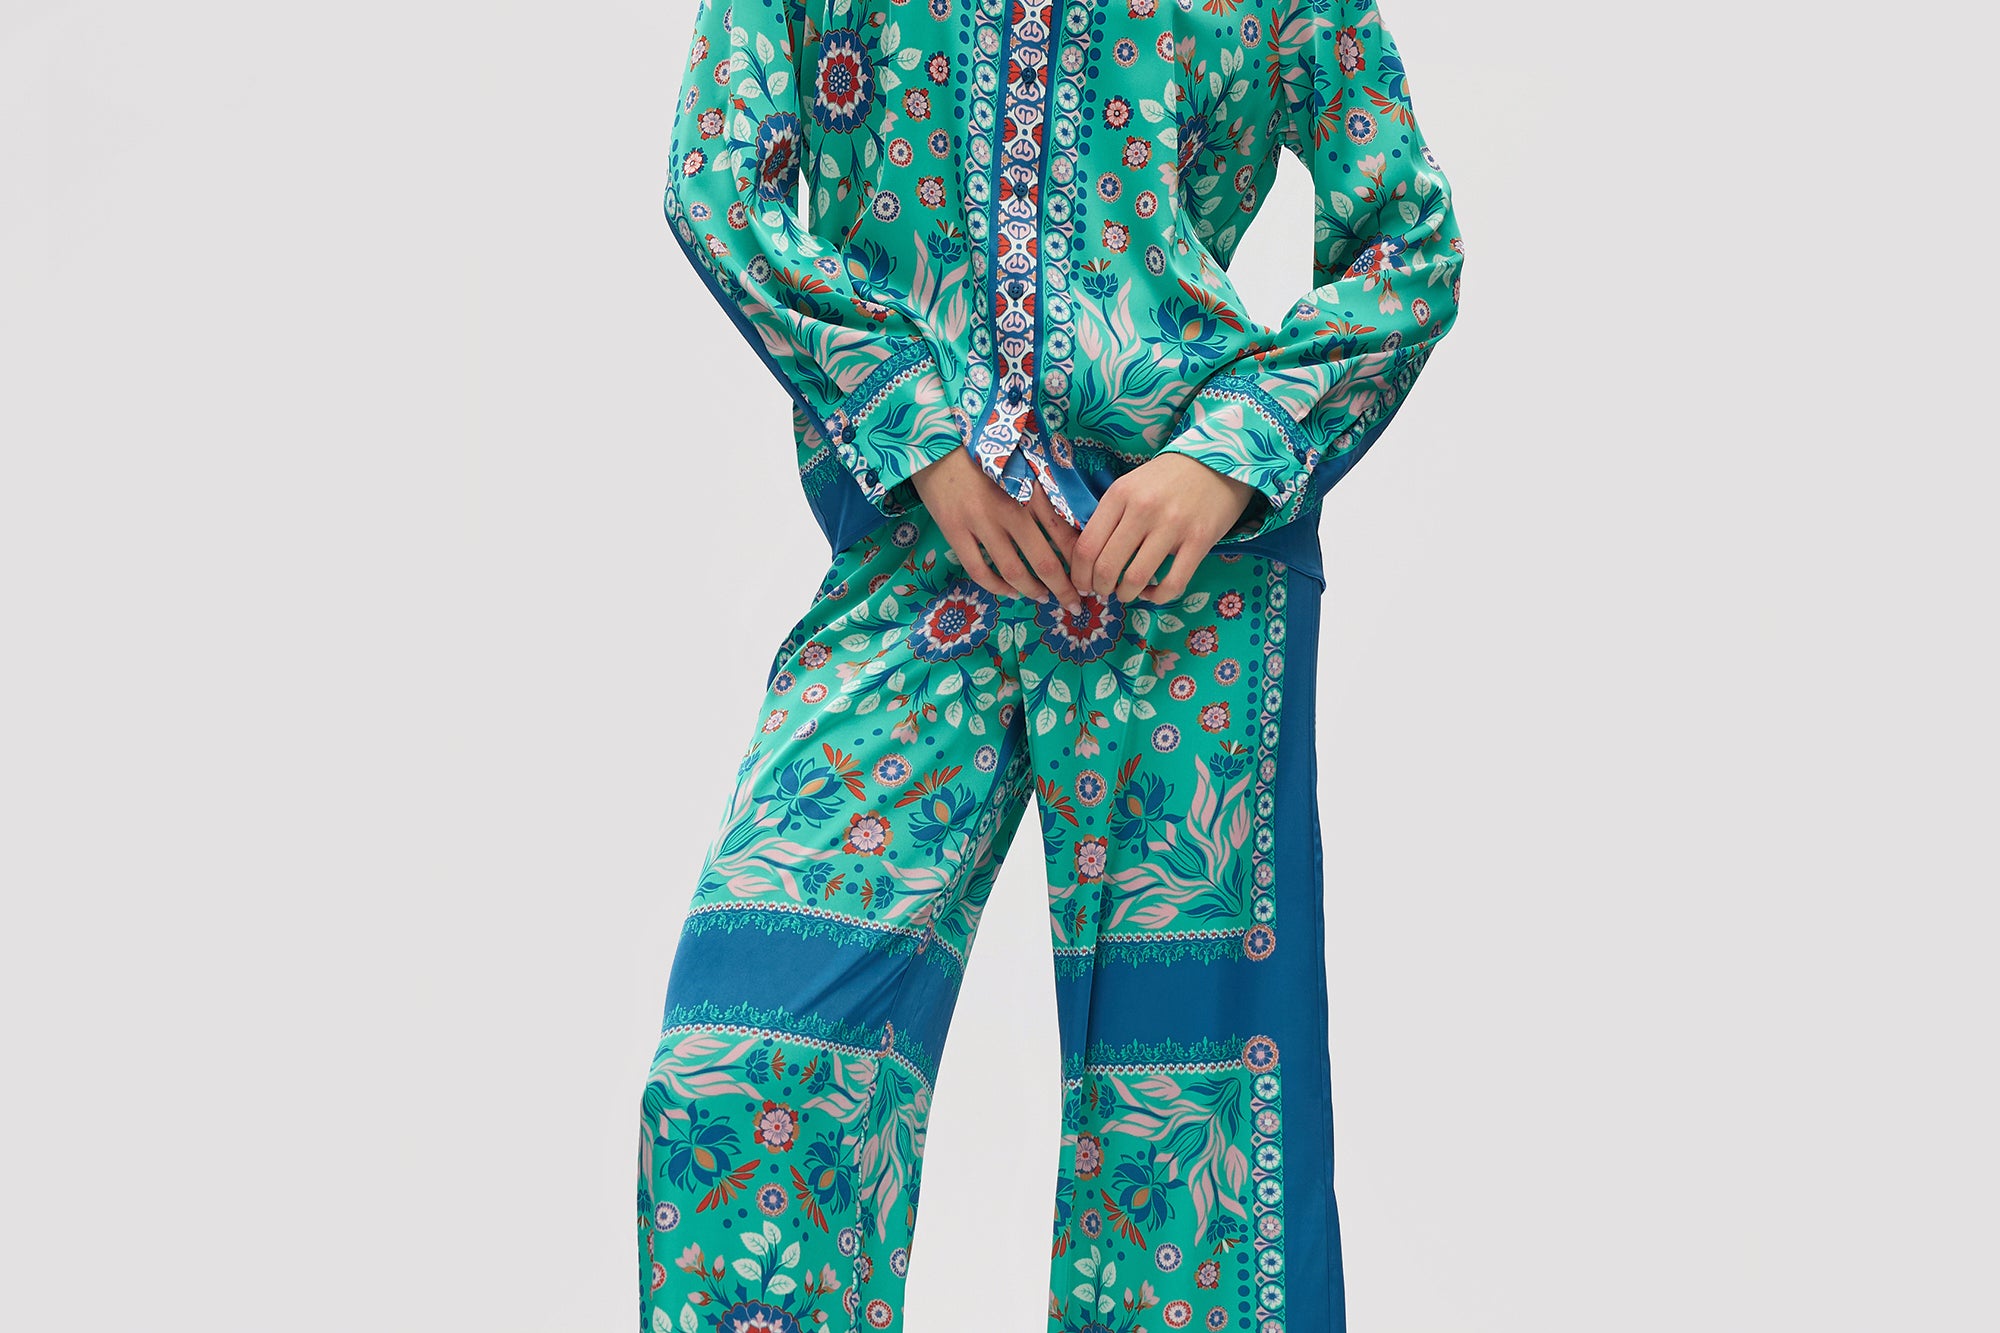 Teal Relaxed Floral Print Long Sleeve Shirt full body